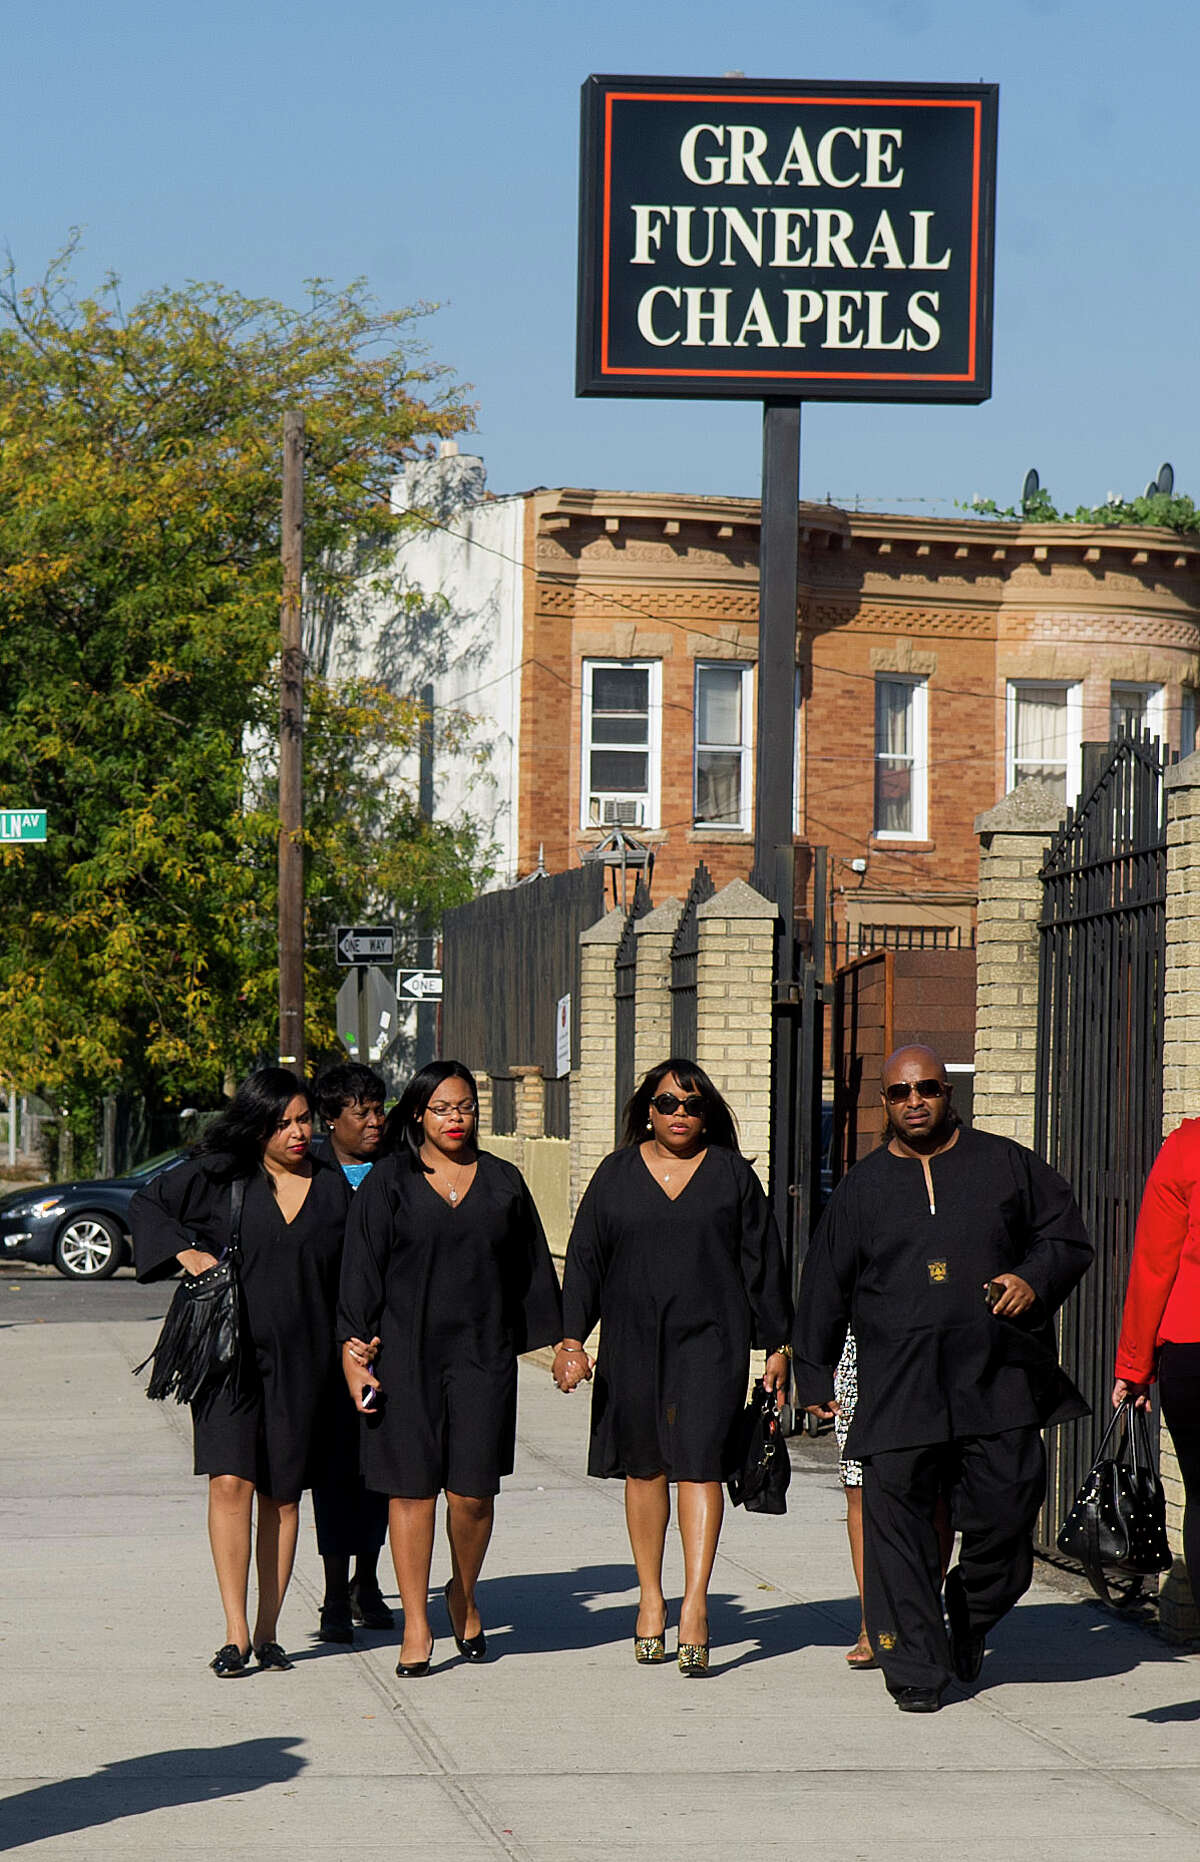 Mourners, including Miriam Carey's sister, Valarie Carey, second from right, enter Grace Funeral Chapels in Brooklyn, N.Y., on Tuesday, October 15, 2013, where the funeral for Miriam Carey was held.